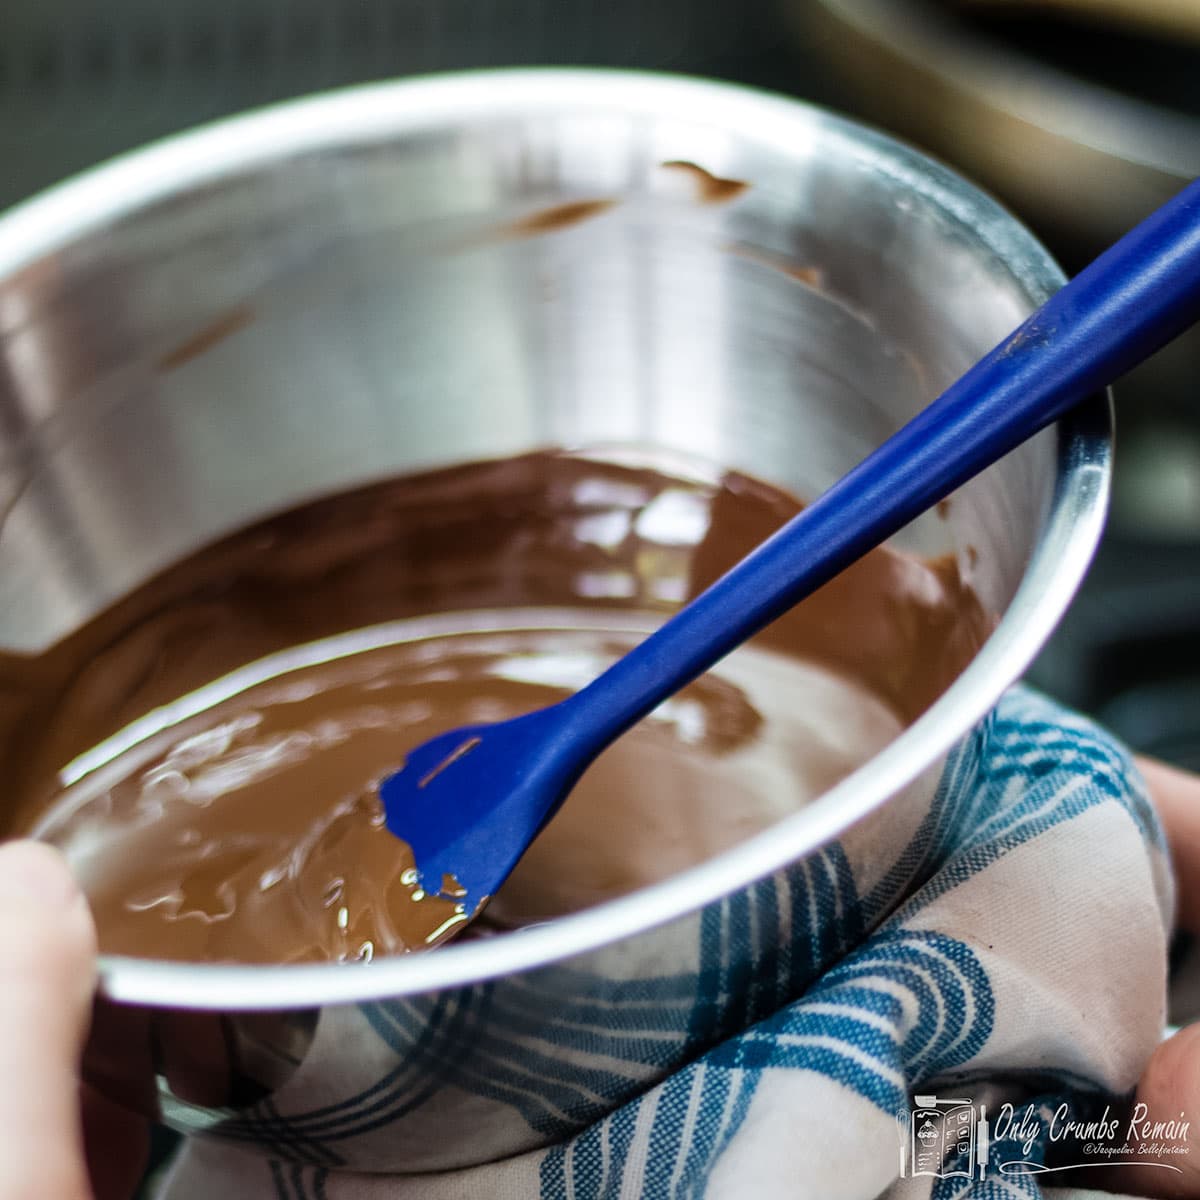 https://onlycrumbsremain.com/wp-content/uploads/2020/09/how-to-temper-chocolate-step-by-step-3.jpg